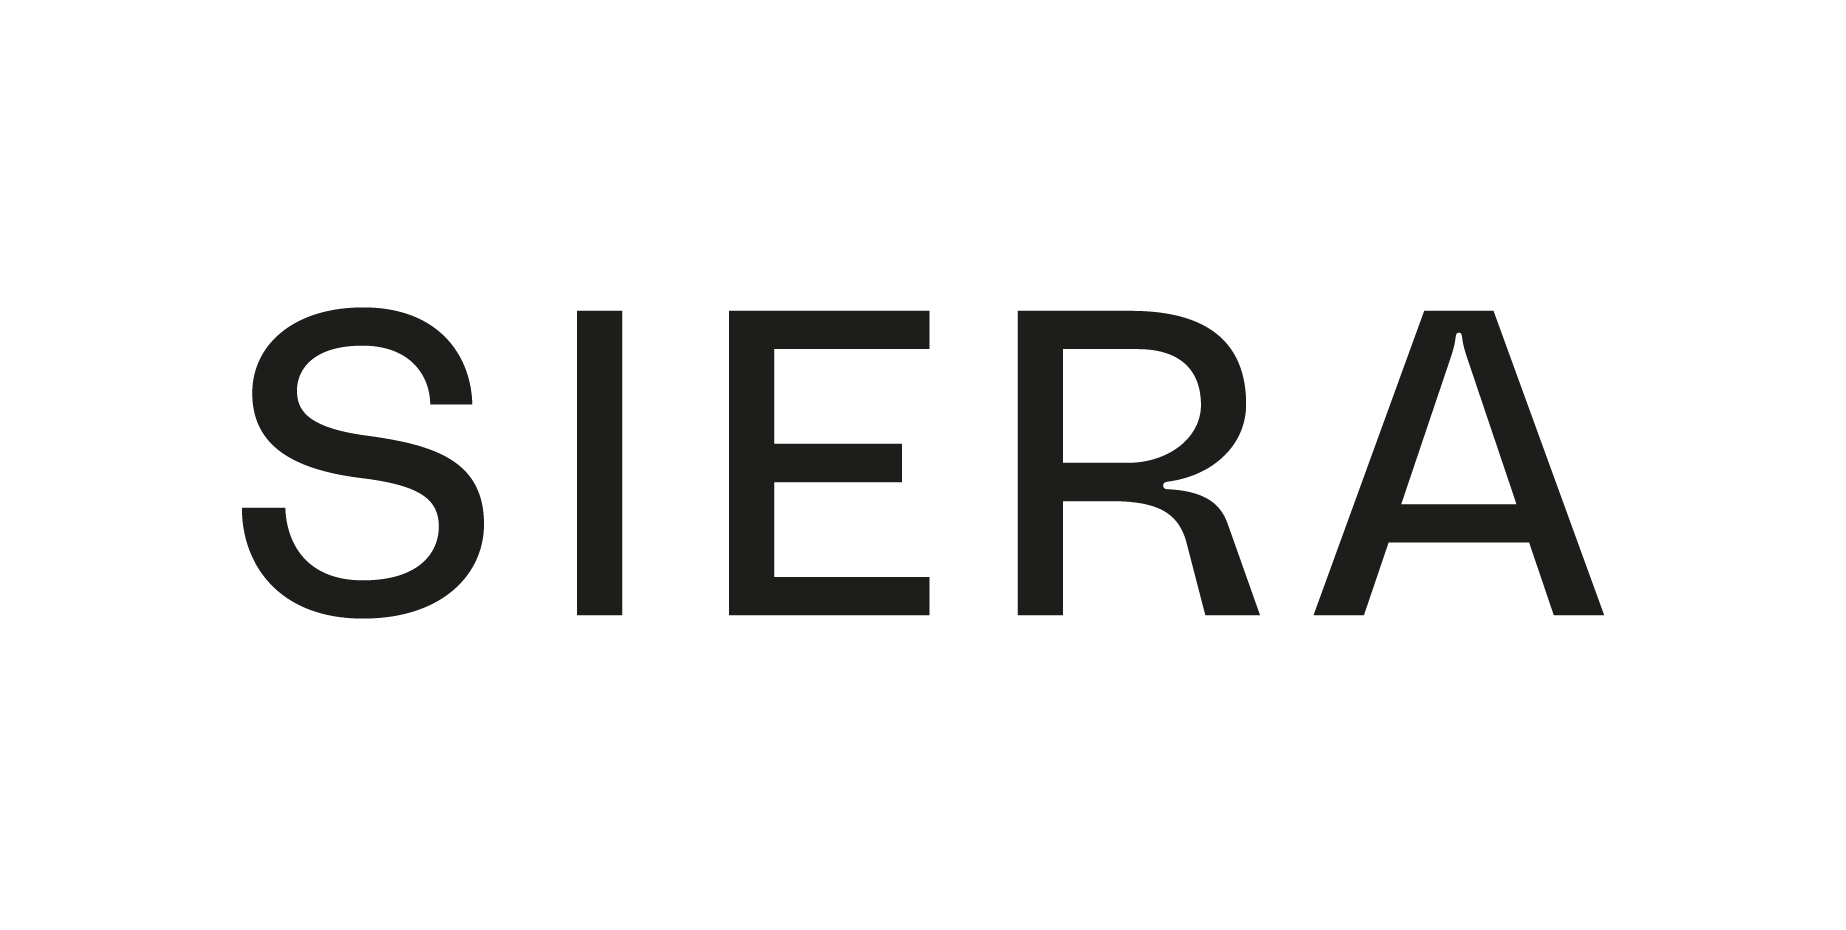 The Siera Group